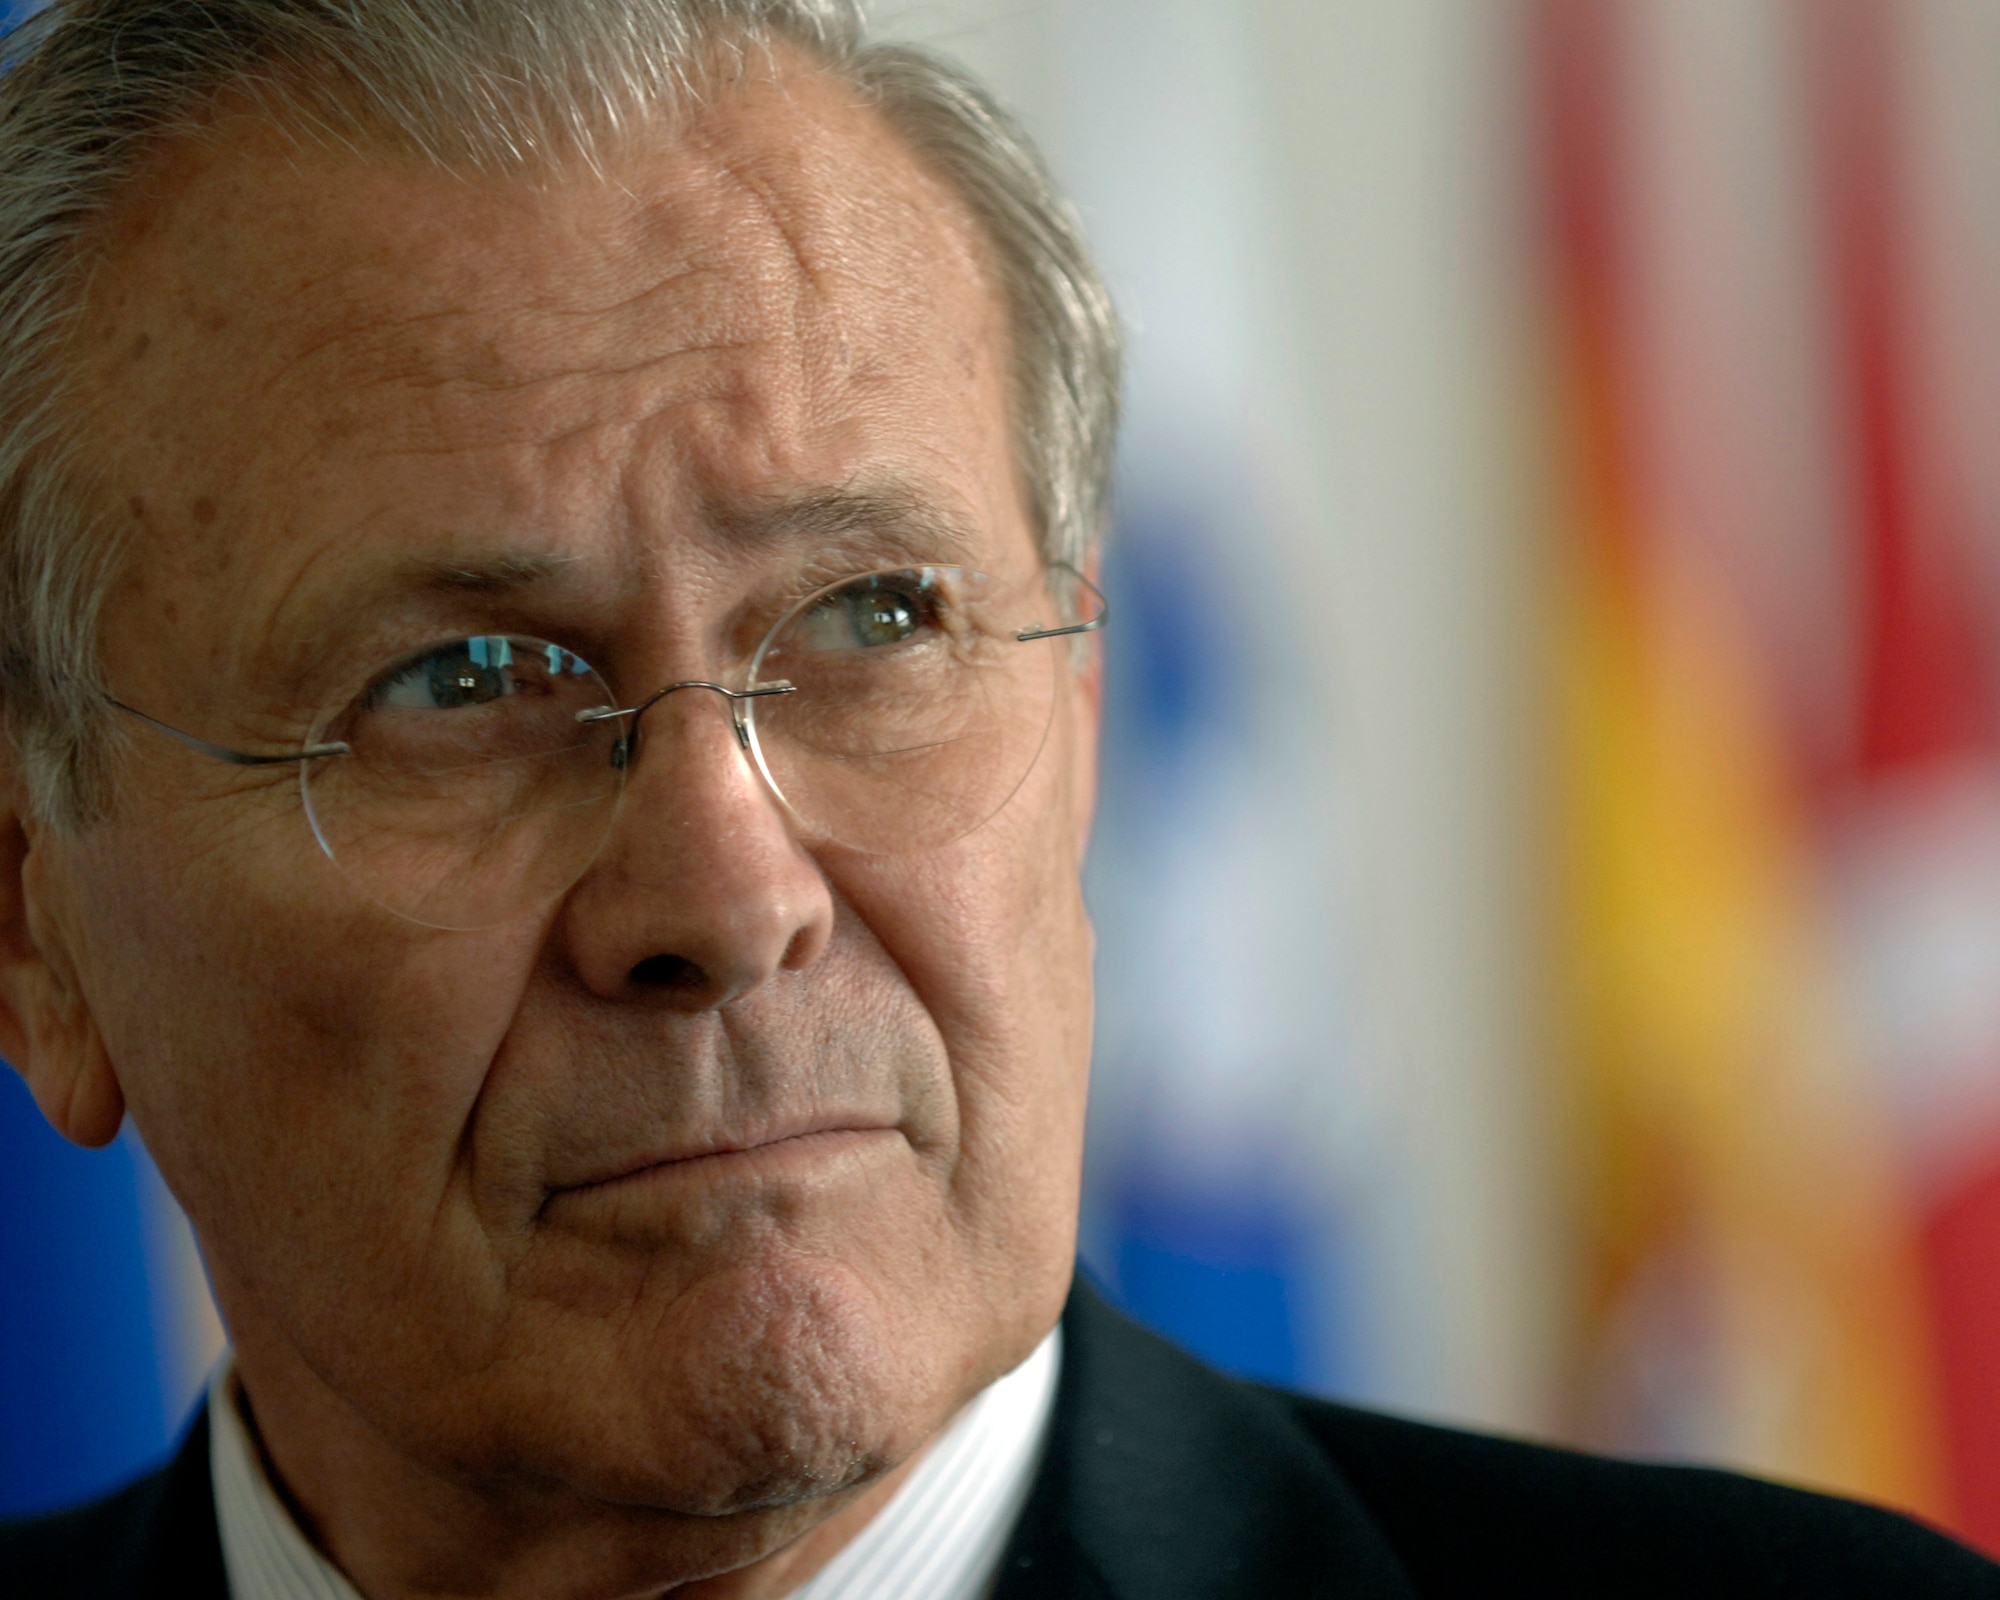 Secretary of Defense Donald H. Rumsfeld listens to a reporters question during a press meeting, while in Portoroz, Slovenia, Sept. 29, 2006. Secretary Rumsfeld is visiting Slovenia to attend the NATO Defense Ministerial and conduct bilateral discussions with Slovenian leaders. Defense Dept. Photo by James Bowman.